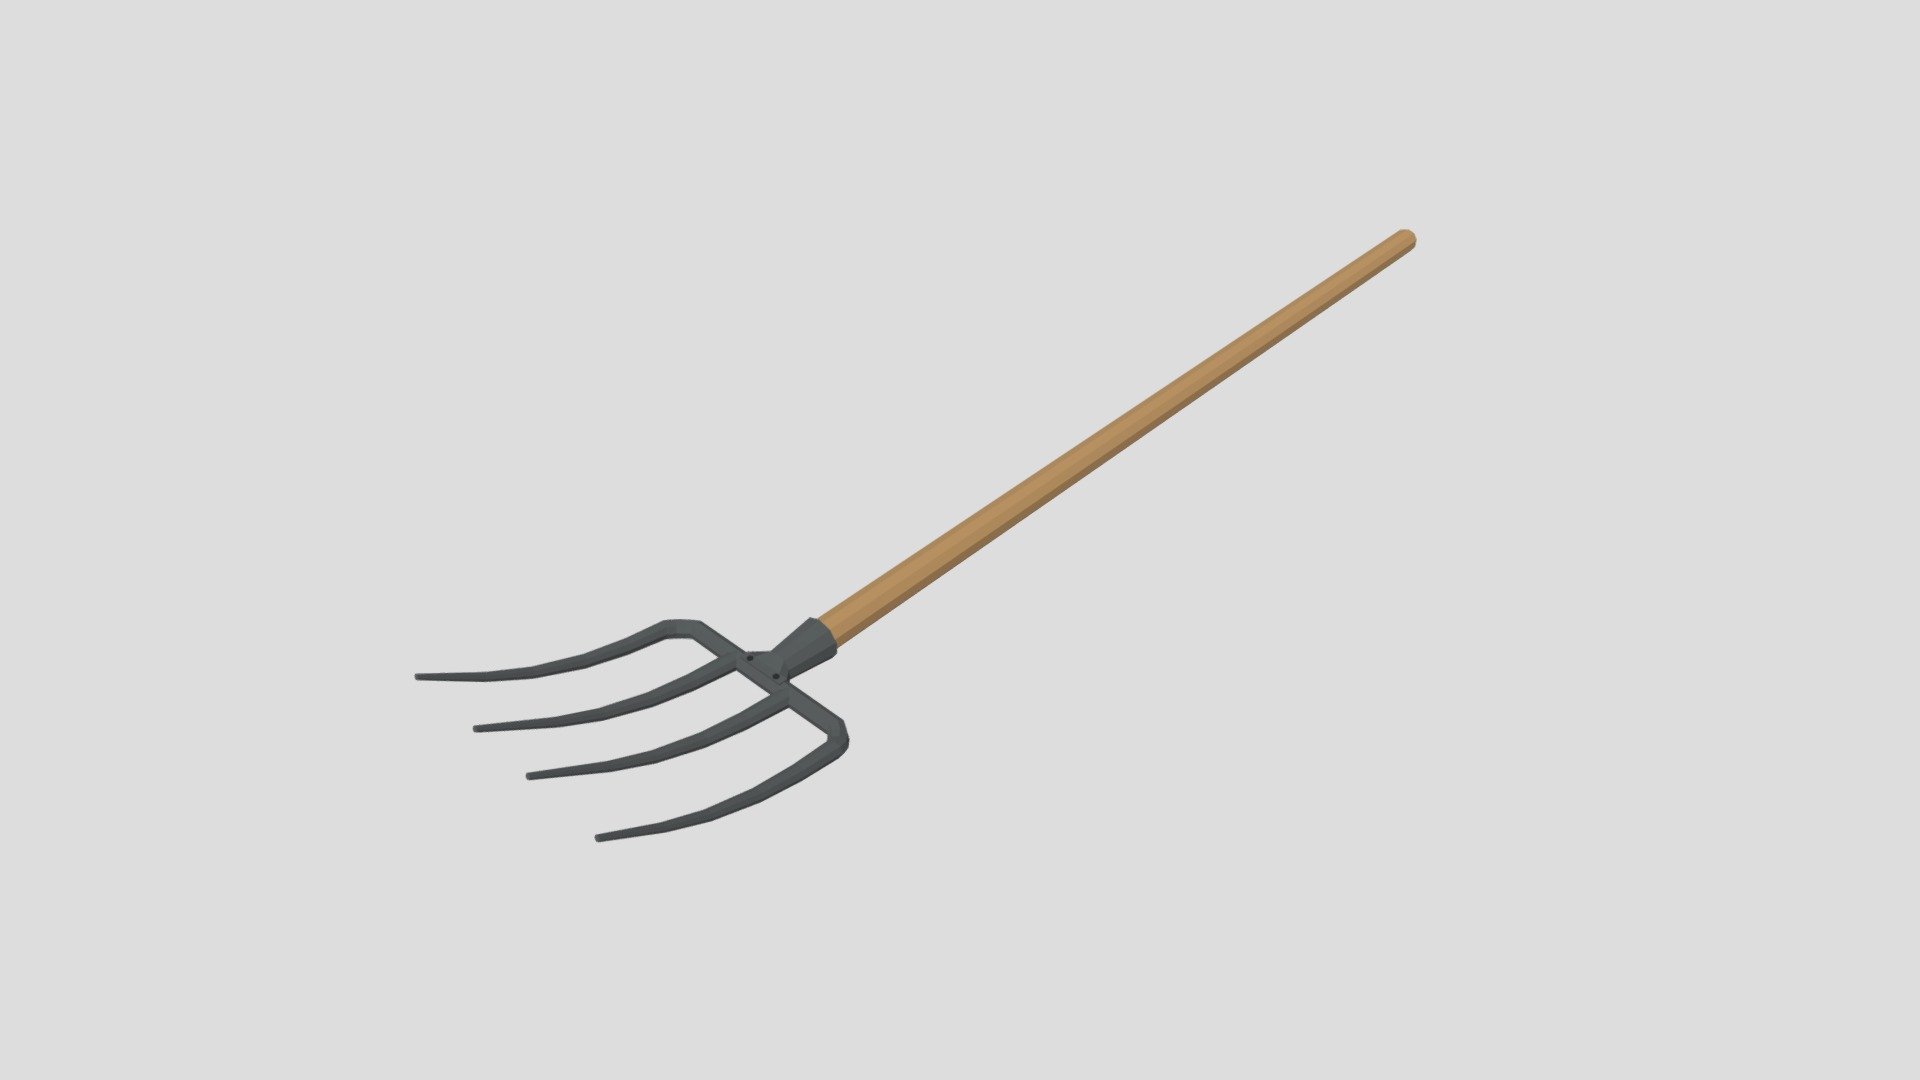 This is a low poly 3D model of a pitchfork. The low poly pitchfork was modeled and prepared for low-poly style renderings, background, general CG visualization presented as 1 mesh with quads only.
Verts : 430 Faces : 406.

The 3D model have simple materials with diffuse colors.

No ring, maps and no UVW mapping is available.

The original file was created in blender. You will receive a 3DS, OBJ, FBX, blend, DAE, Stl, gLTF.

All preview images were rendered with Blender Cycles. Product is ready to render out-of-the-box. Please note that the lights, cameras, and background is only included in the .blend file. The model is clean and alone in the other provided files, centred at origin and has real-world scale 3d model